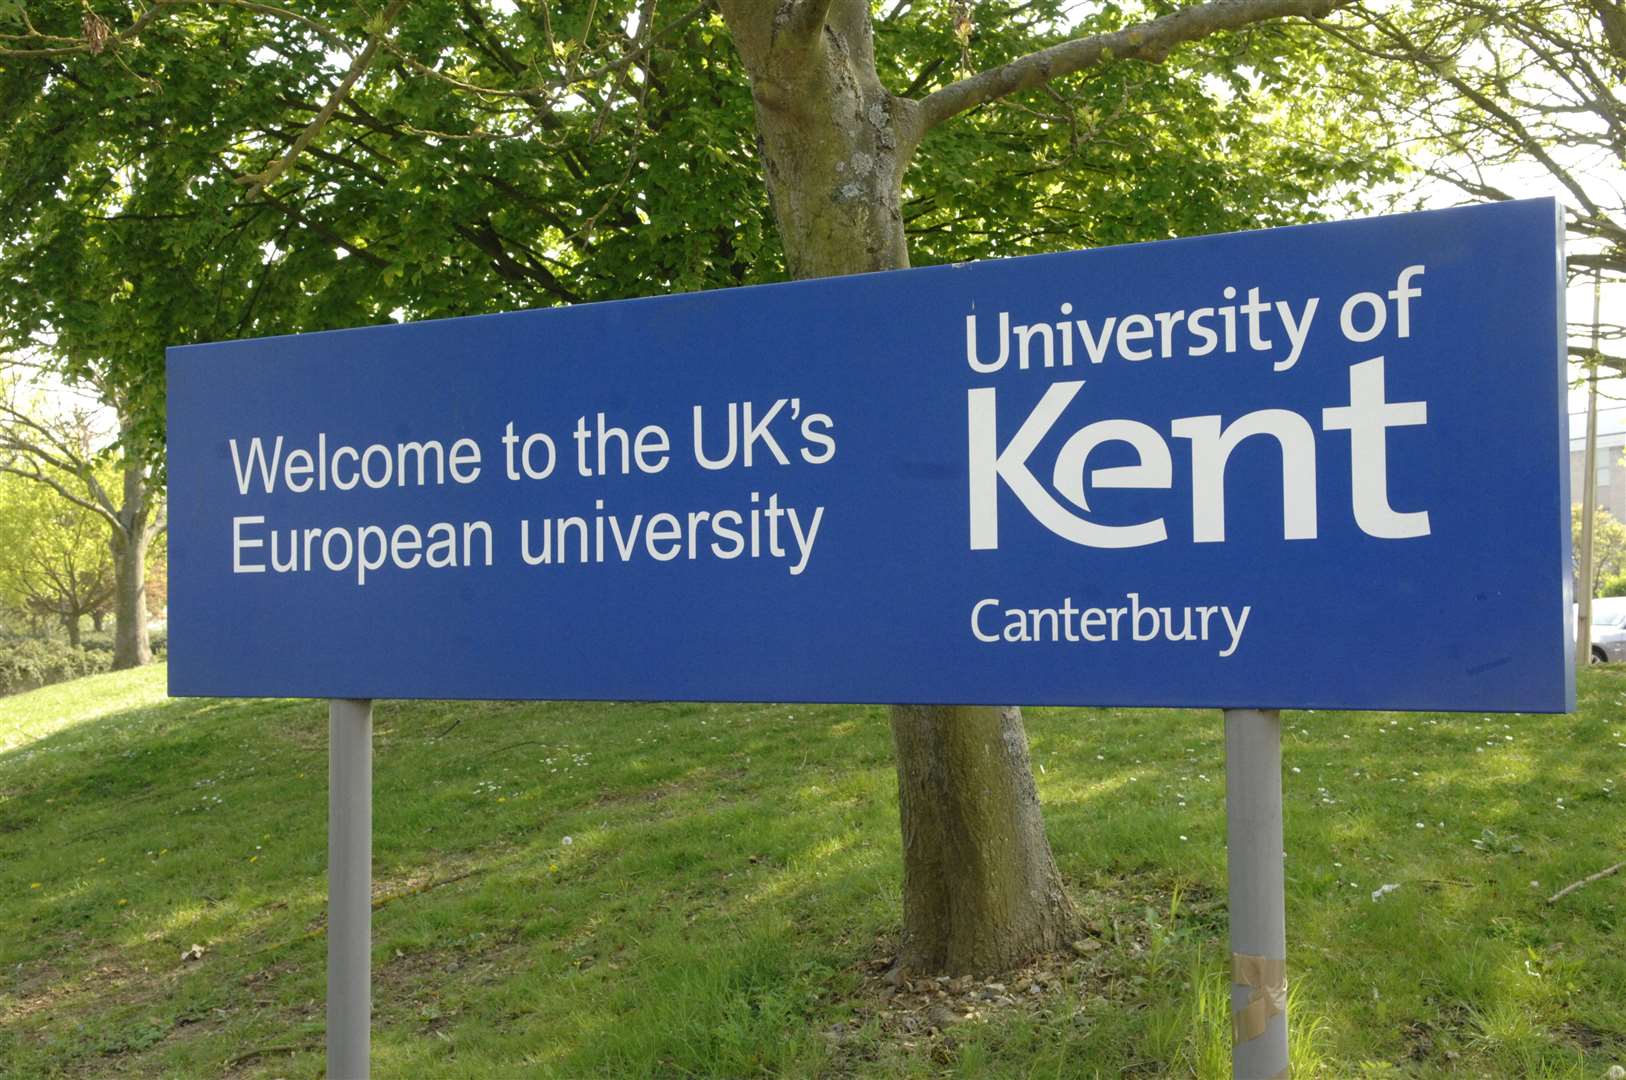 The University of Kent in Canterbury has reported a suspected outbreak. Picture: Chris Davey